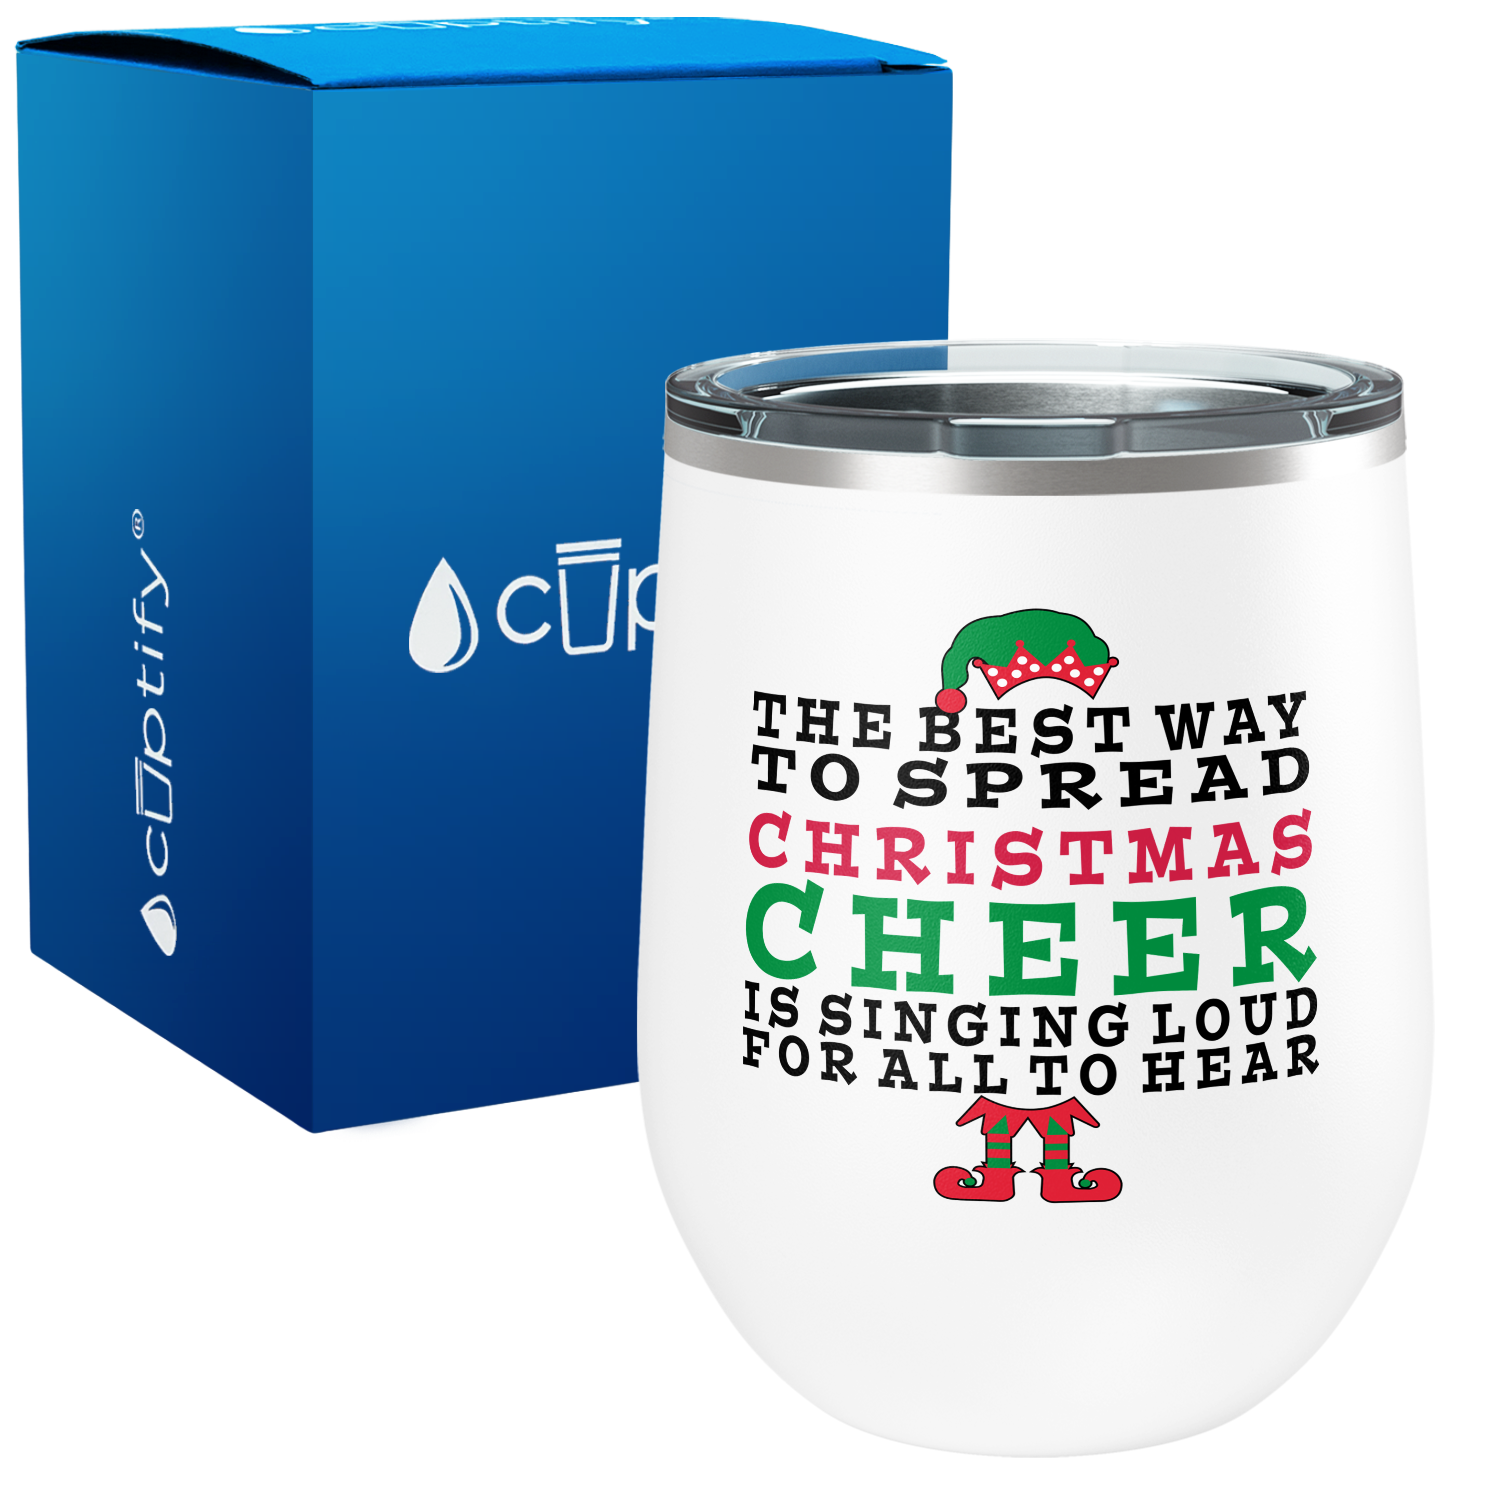 The Best Way to Spread Christmas Cheer on 12oz Christmas Wine Tumbler